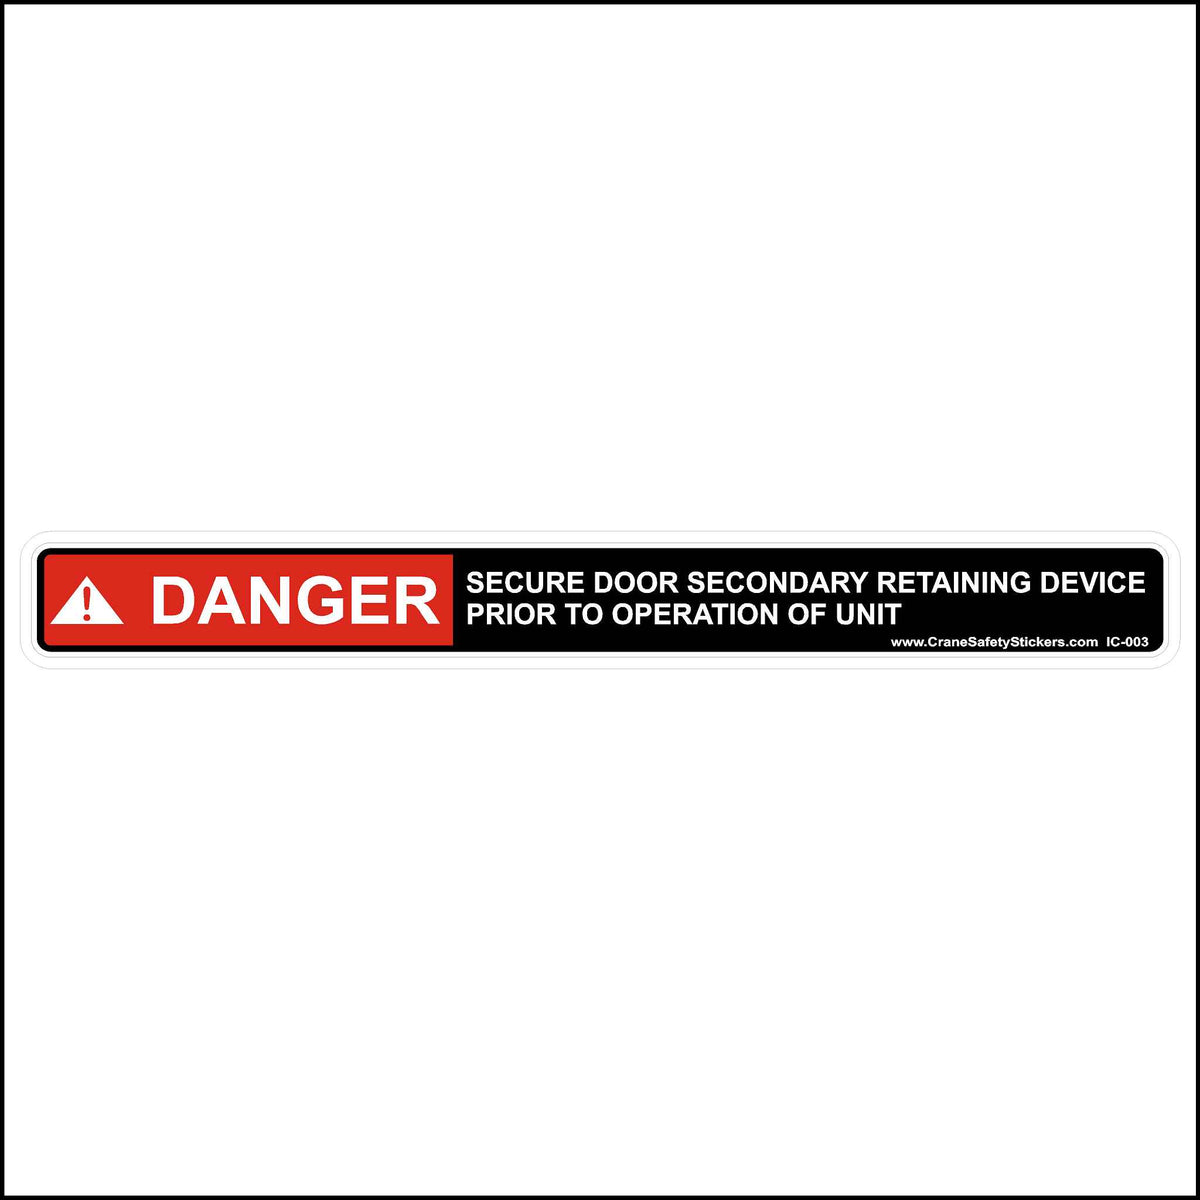 Small Bucket Truck Safety Decal Kit